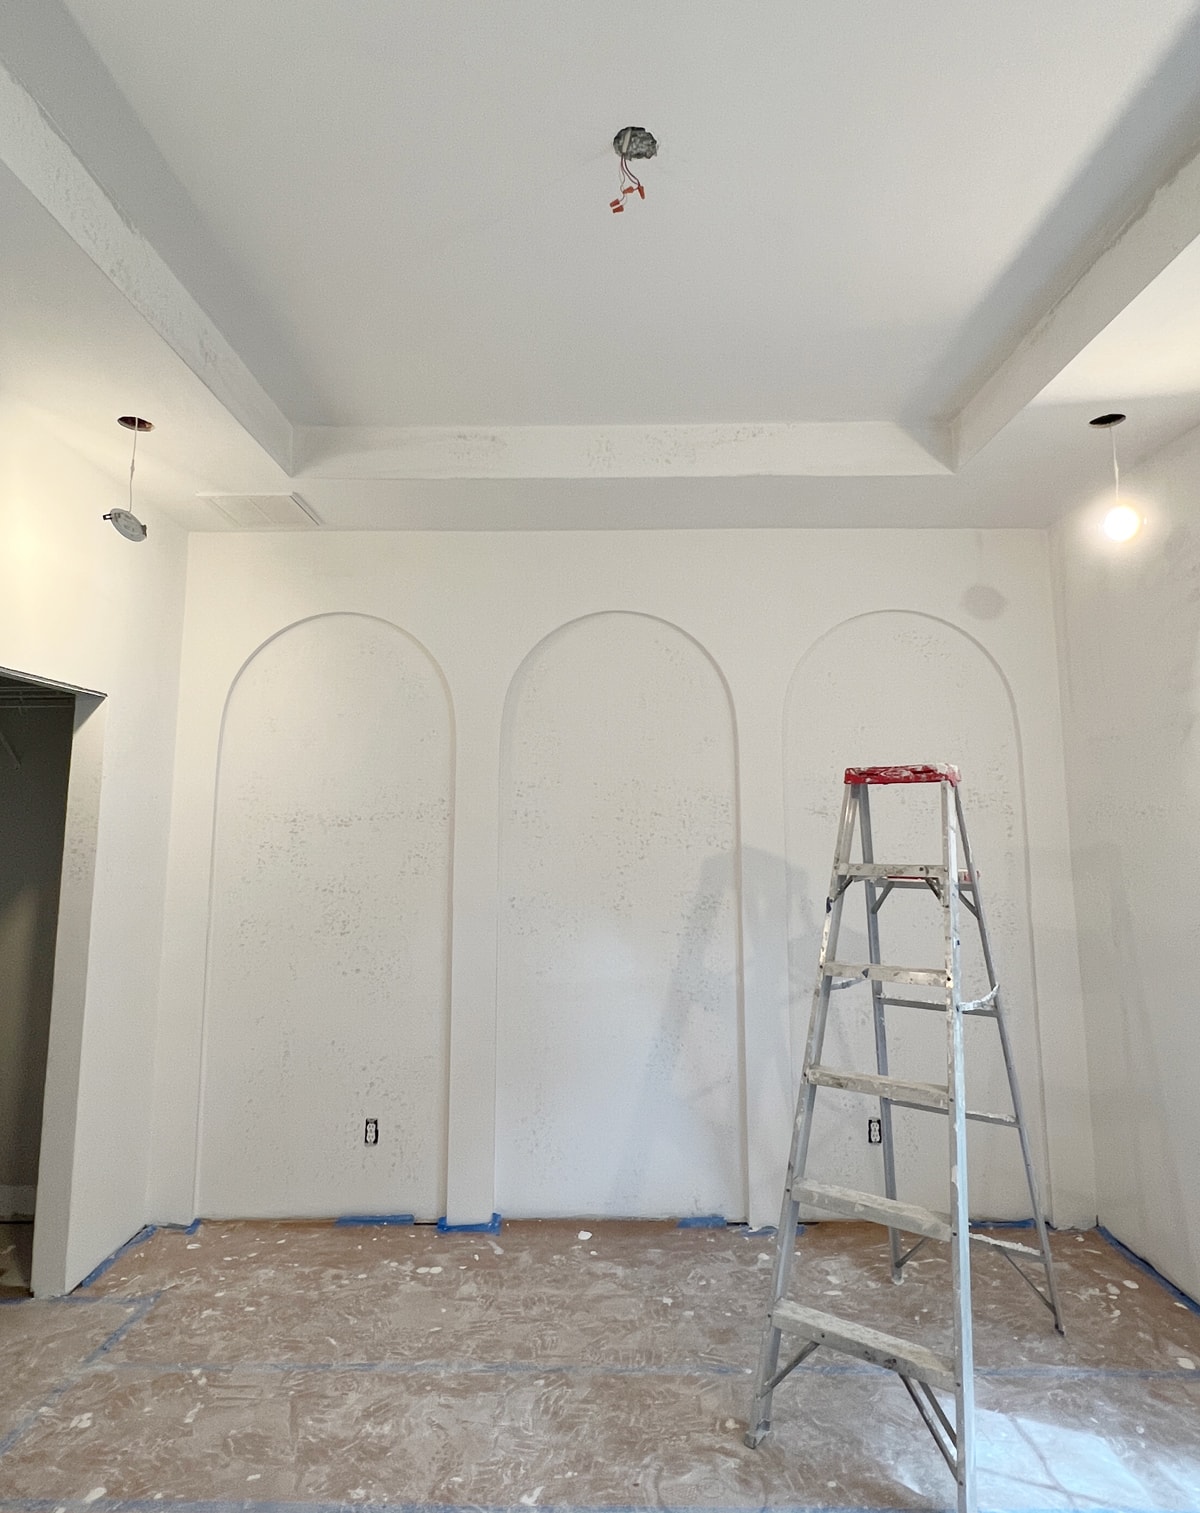 How to Drywall an Arch — Archways & Ceilings